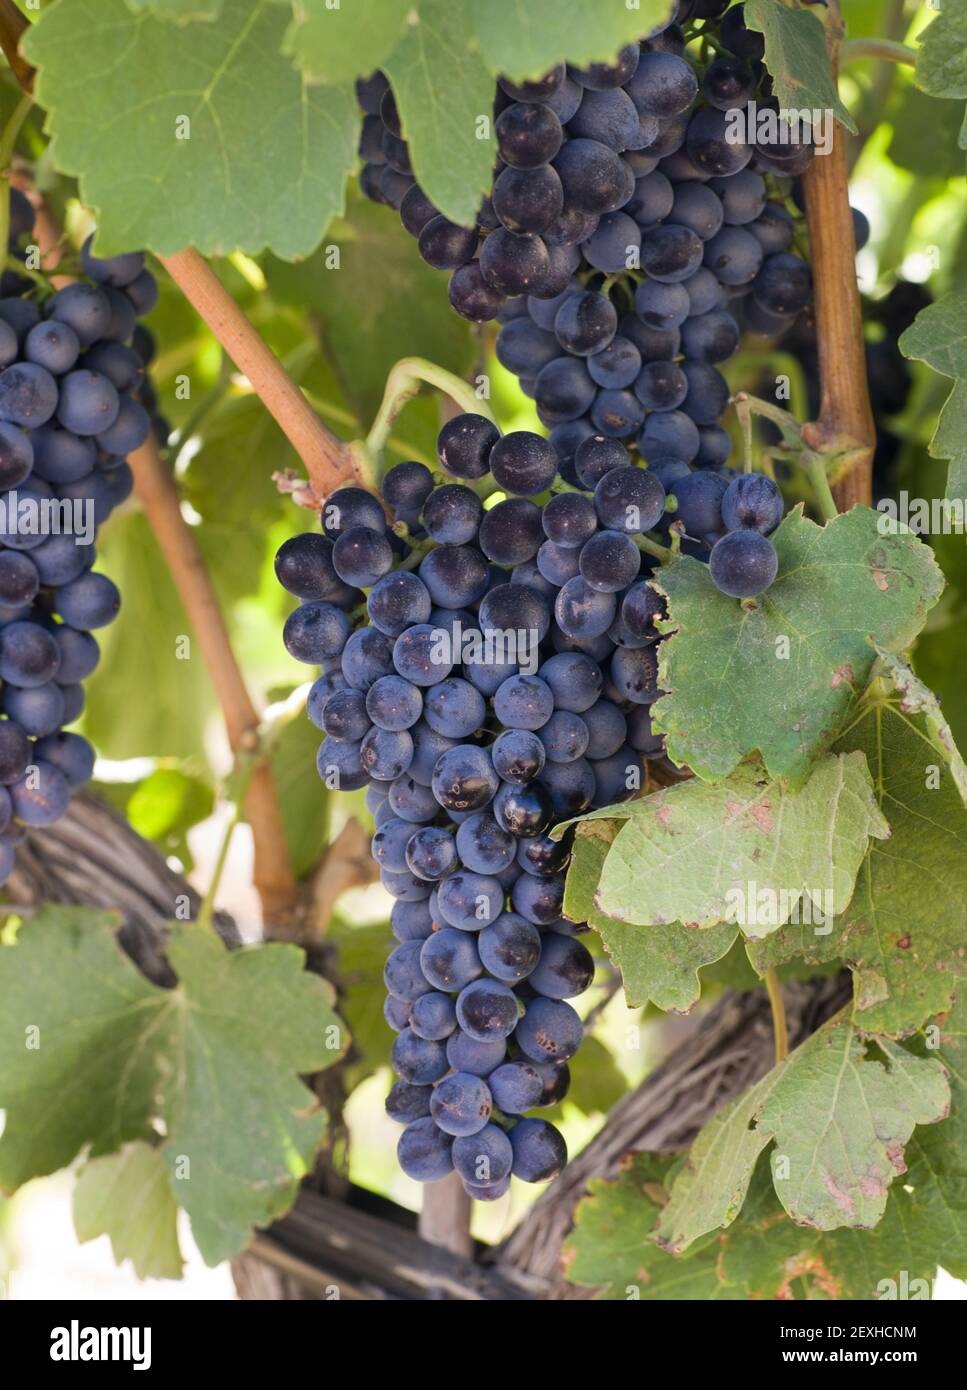 Grapes Clustered Together on Vintners Vine Farm Field Stock Photo